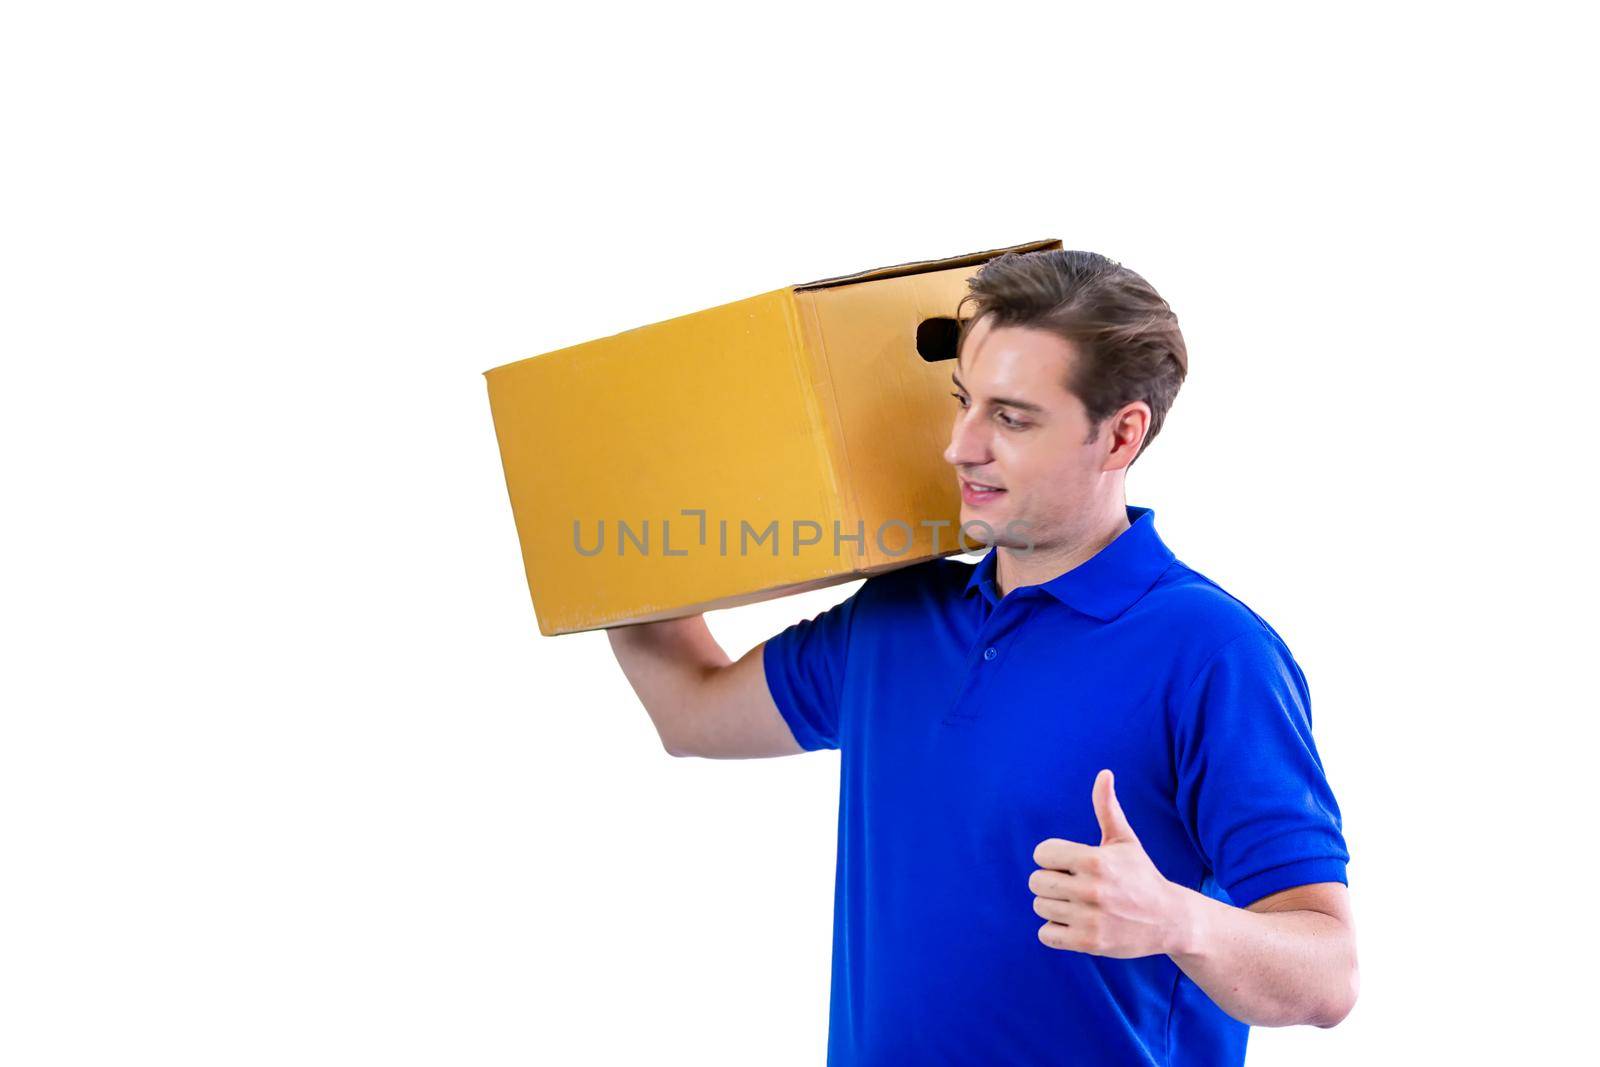 Delivery man carrying package carton box isolated on white background.